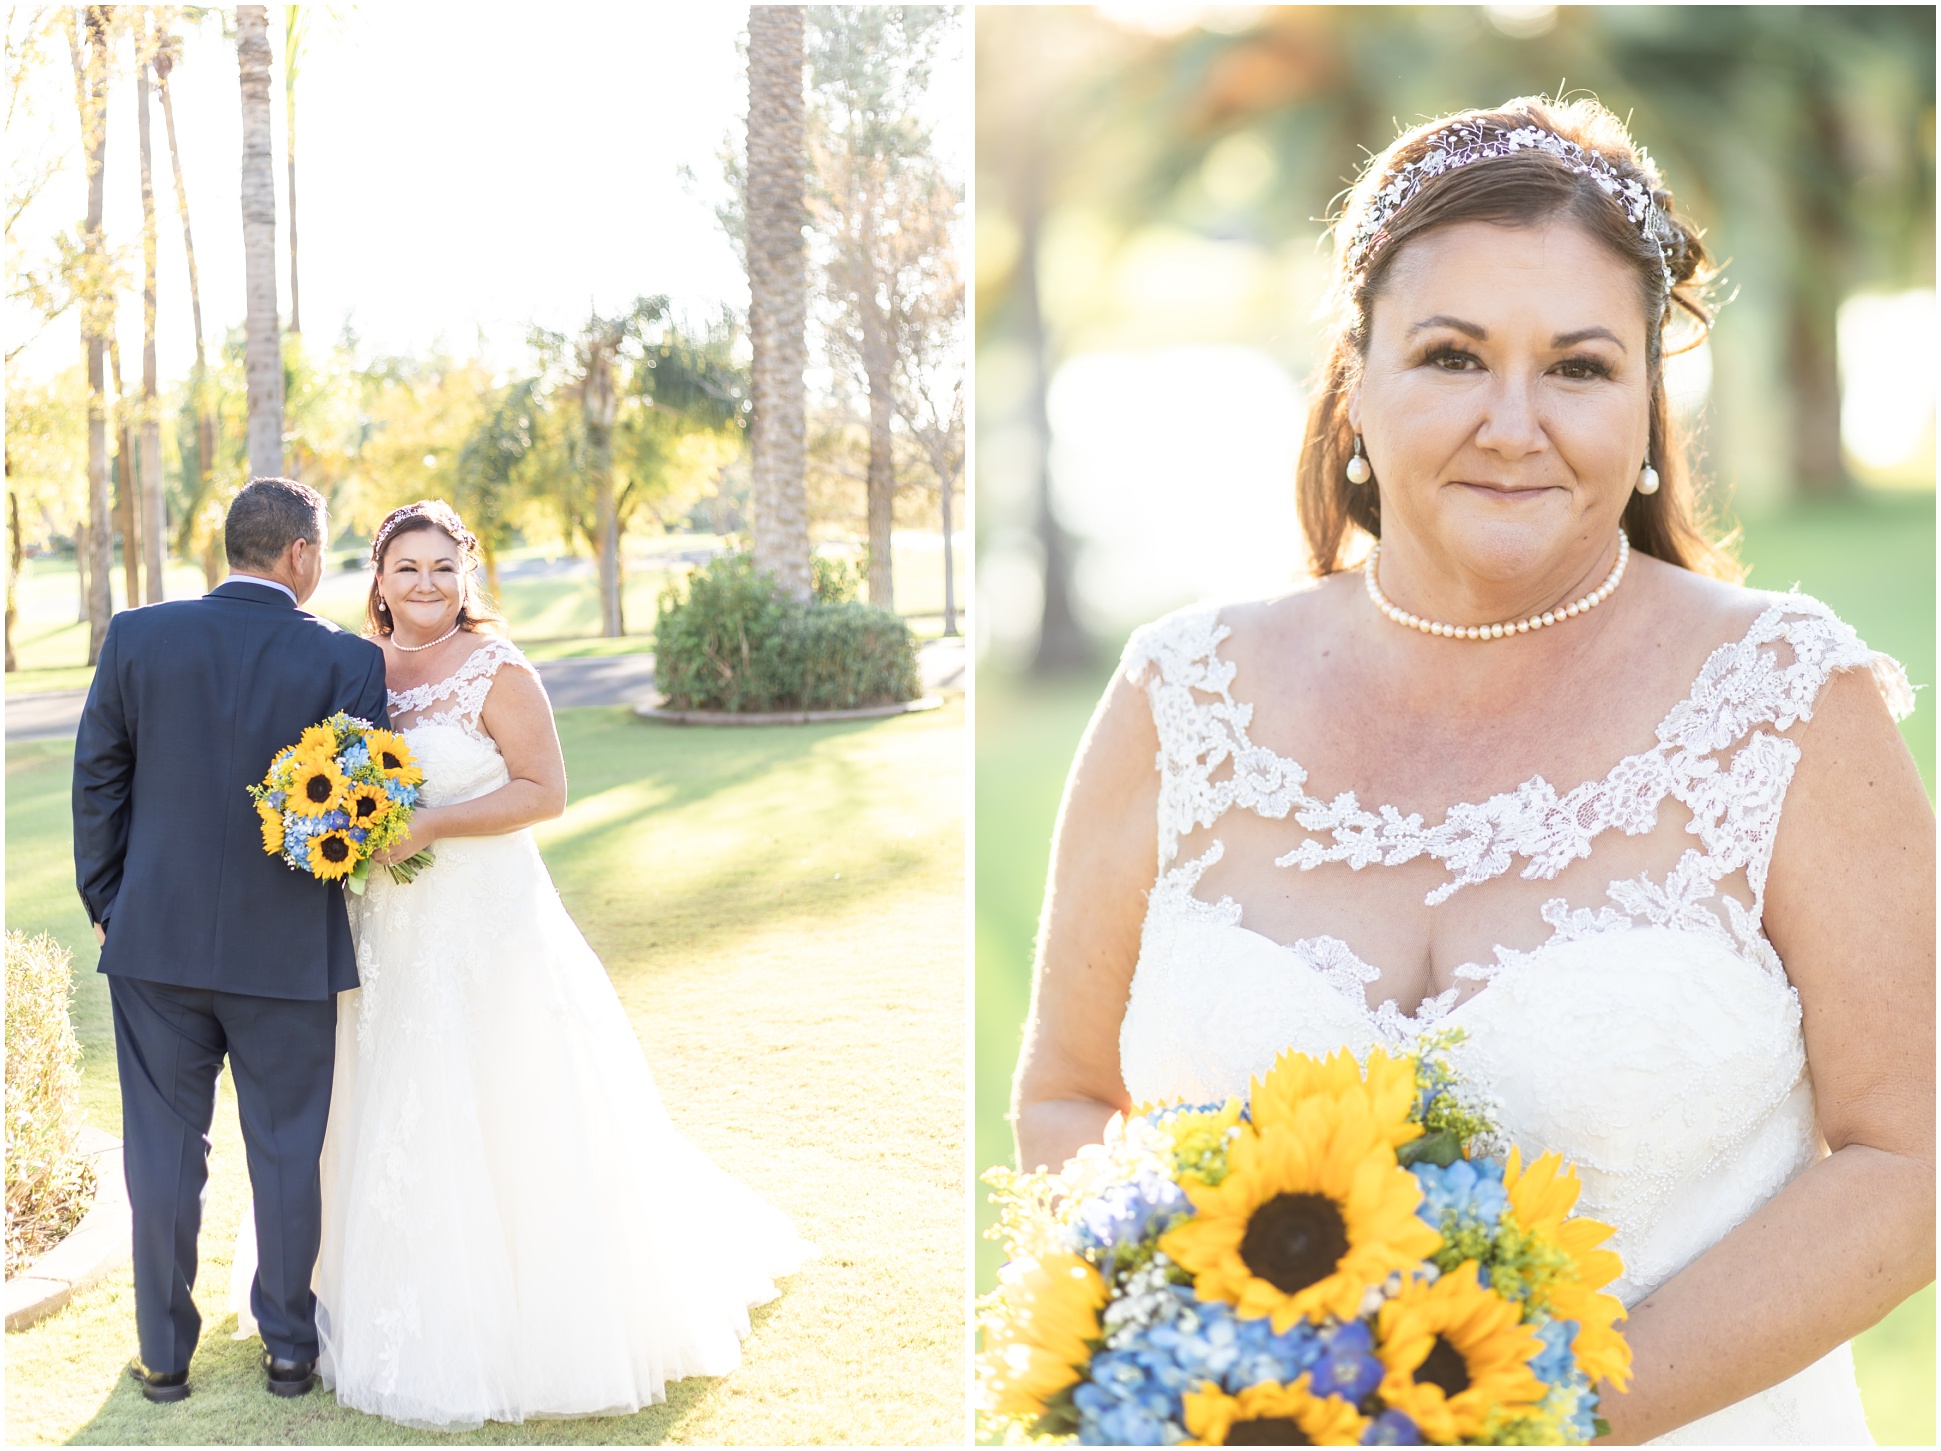 Left Image: Bride and Groom Portraits, Right Image: Bride